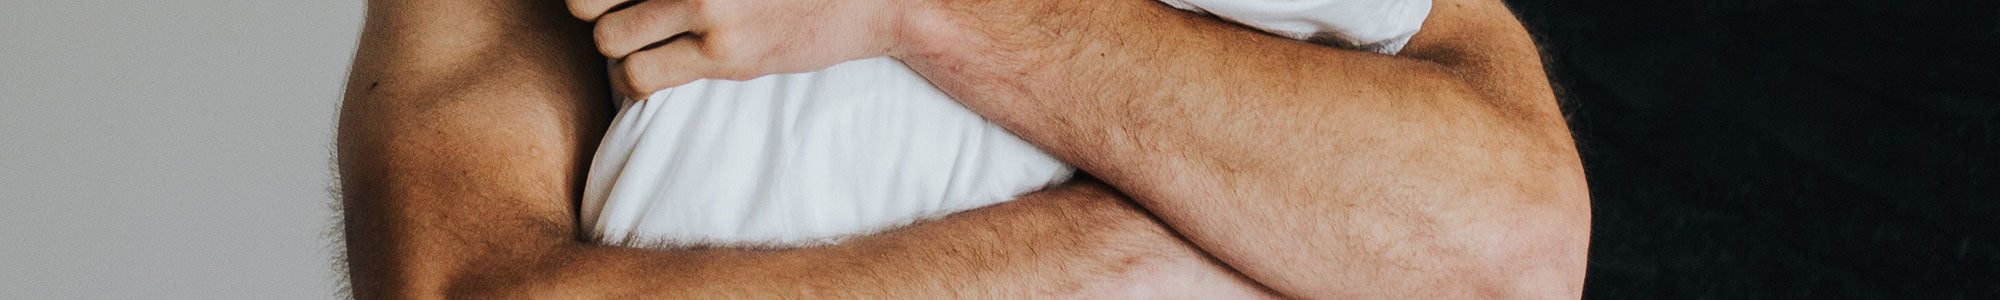 Man in underwear holding a pillow suffering from erectile dysfunction